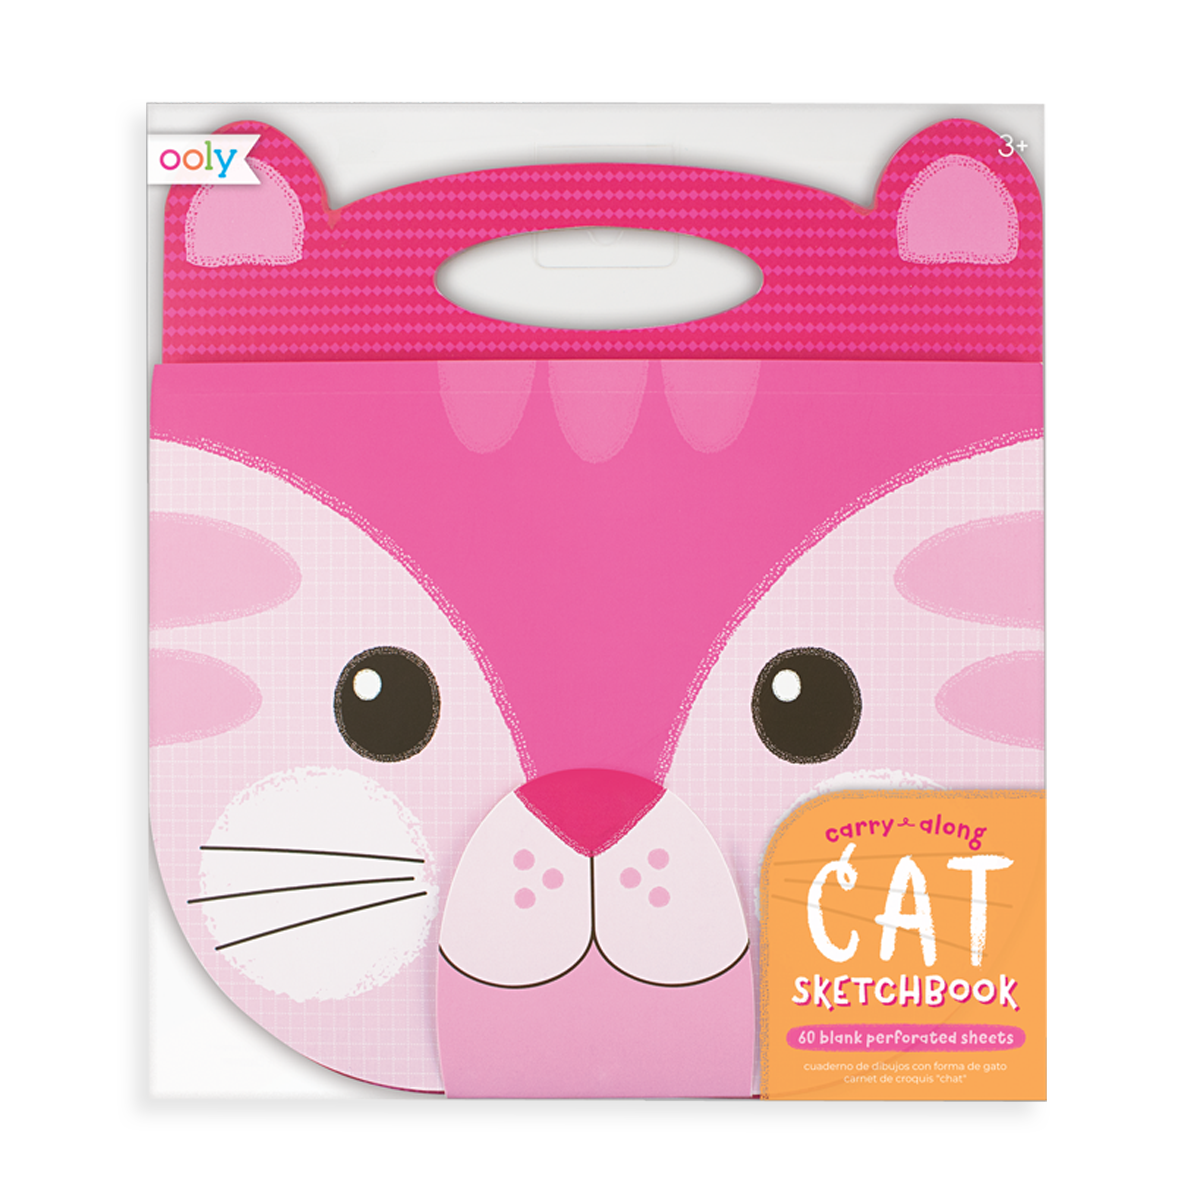 Carry along cat in packaging